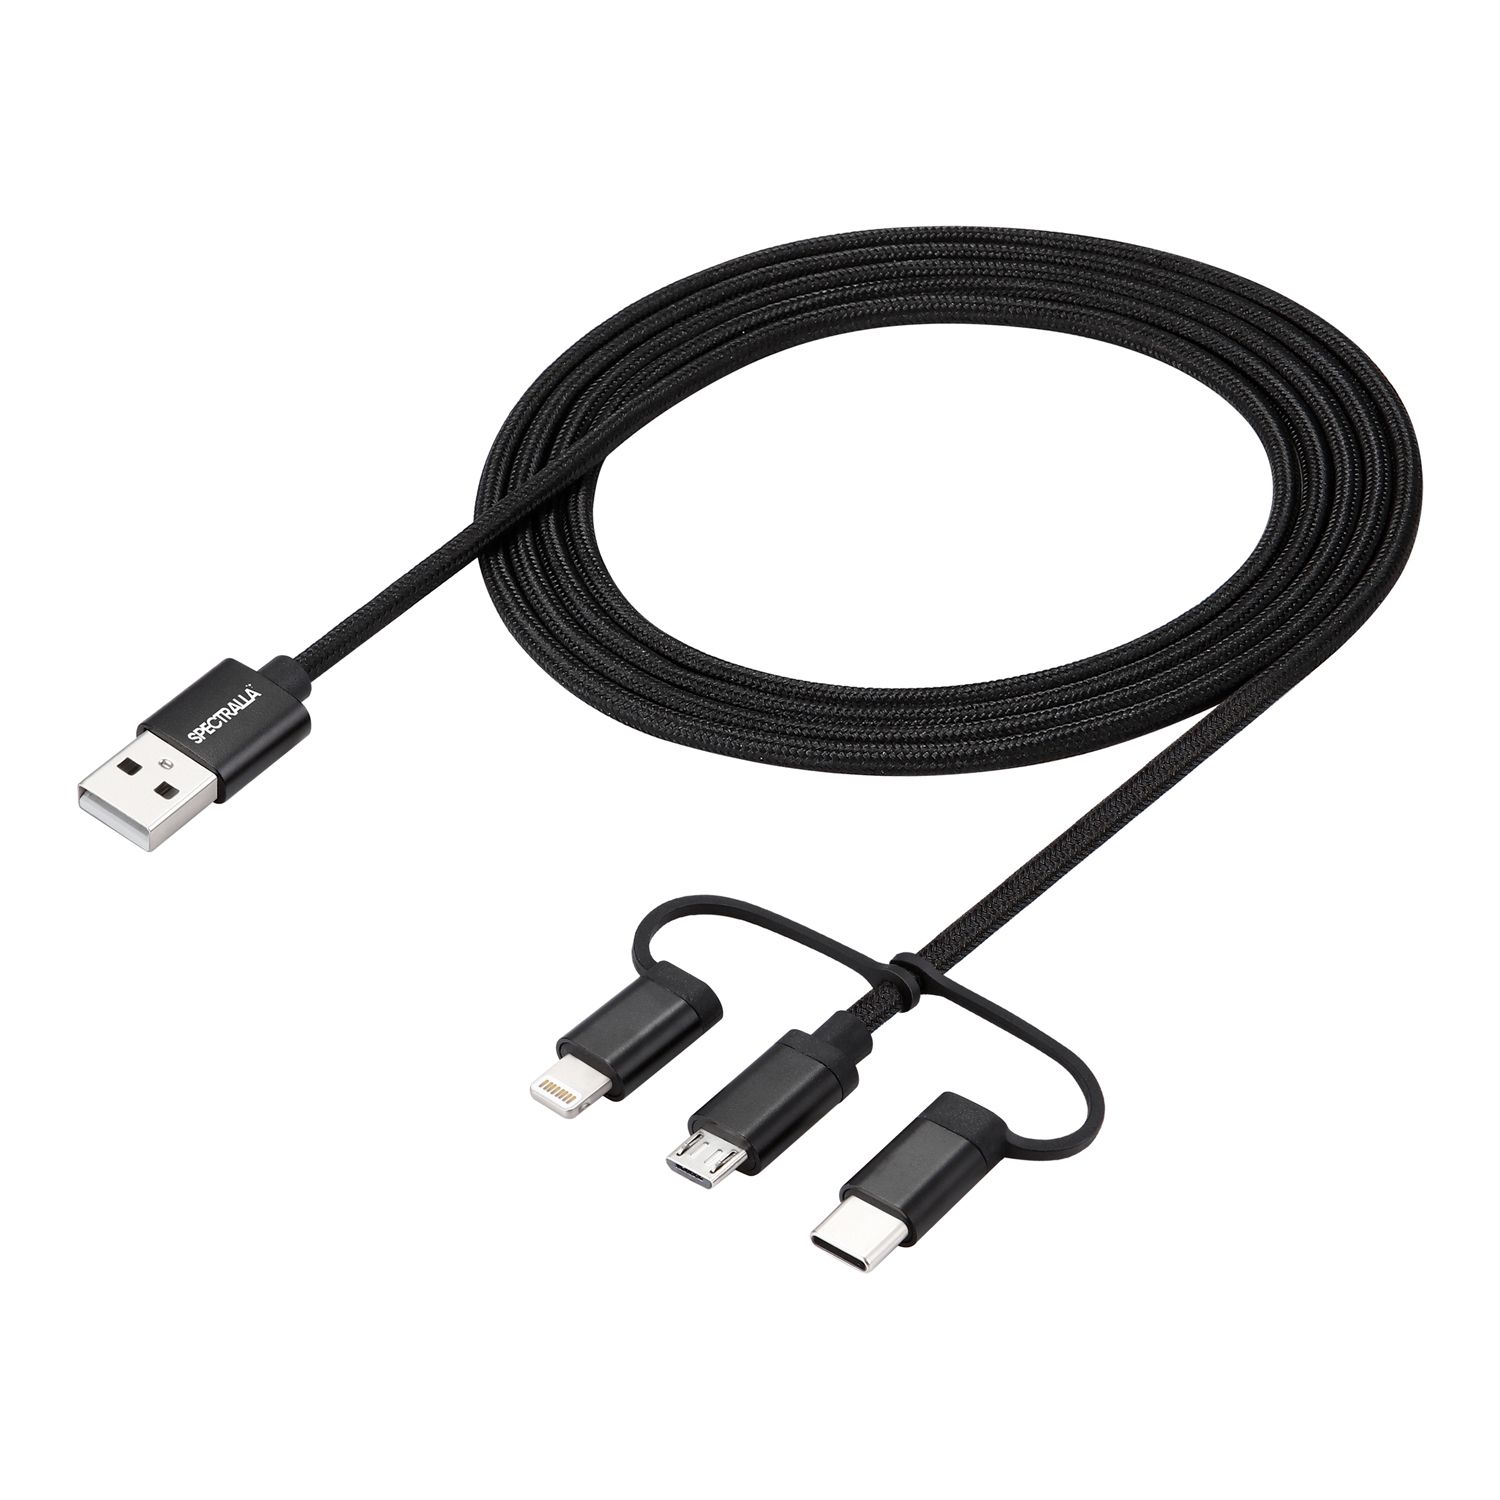 Usb-C Cable For Macbook Air